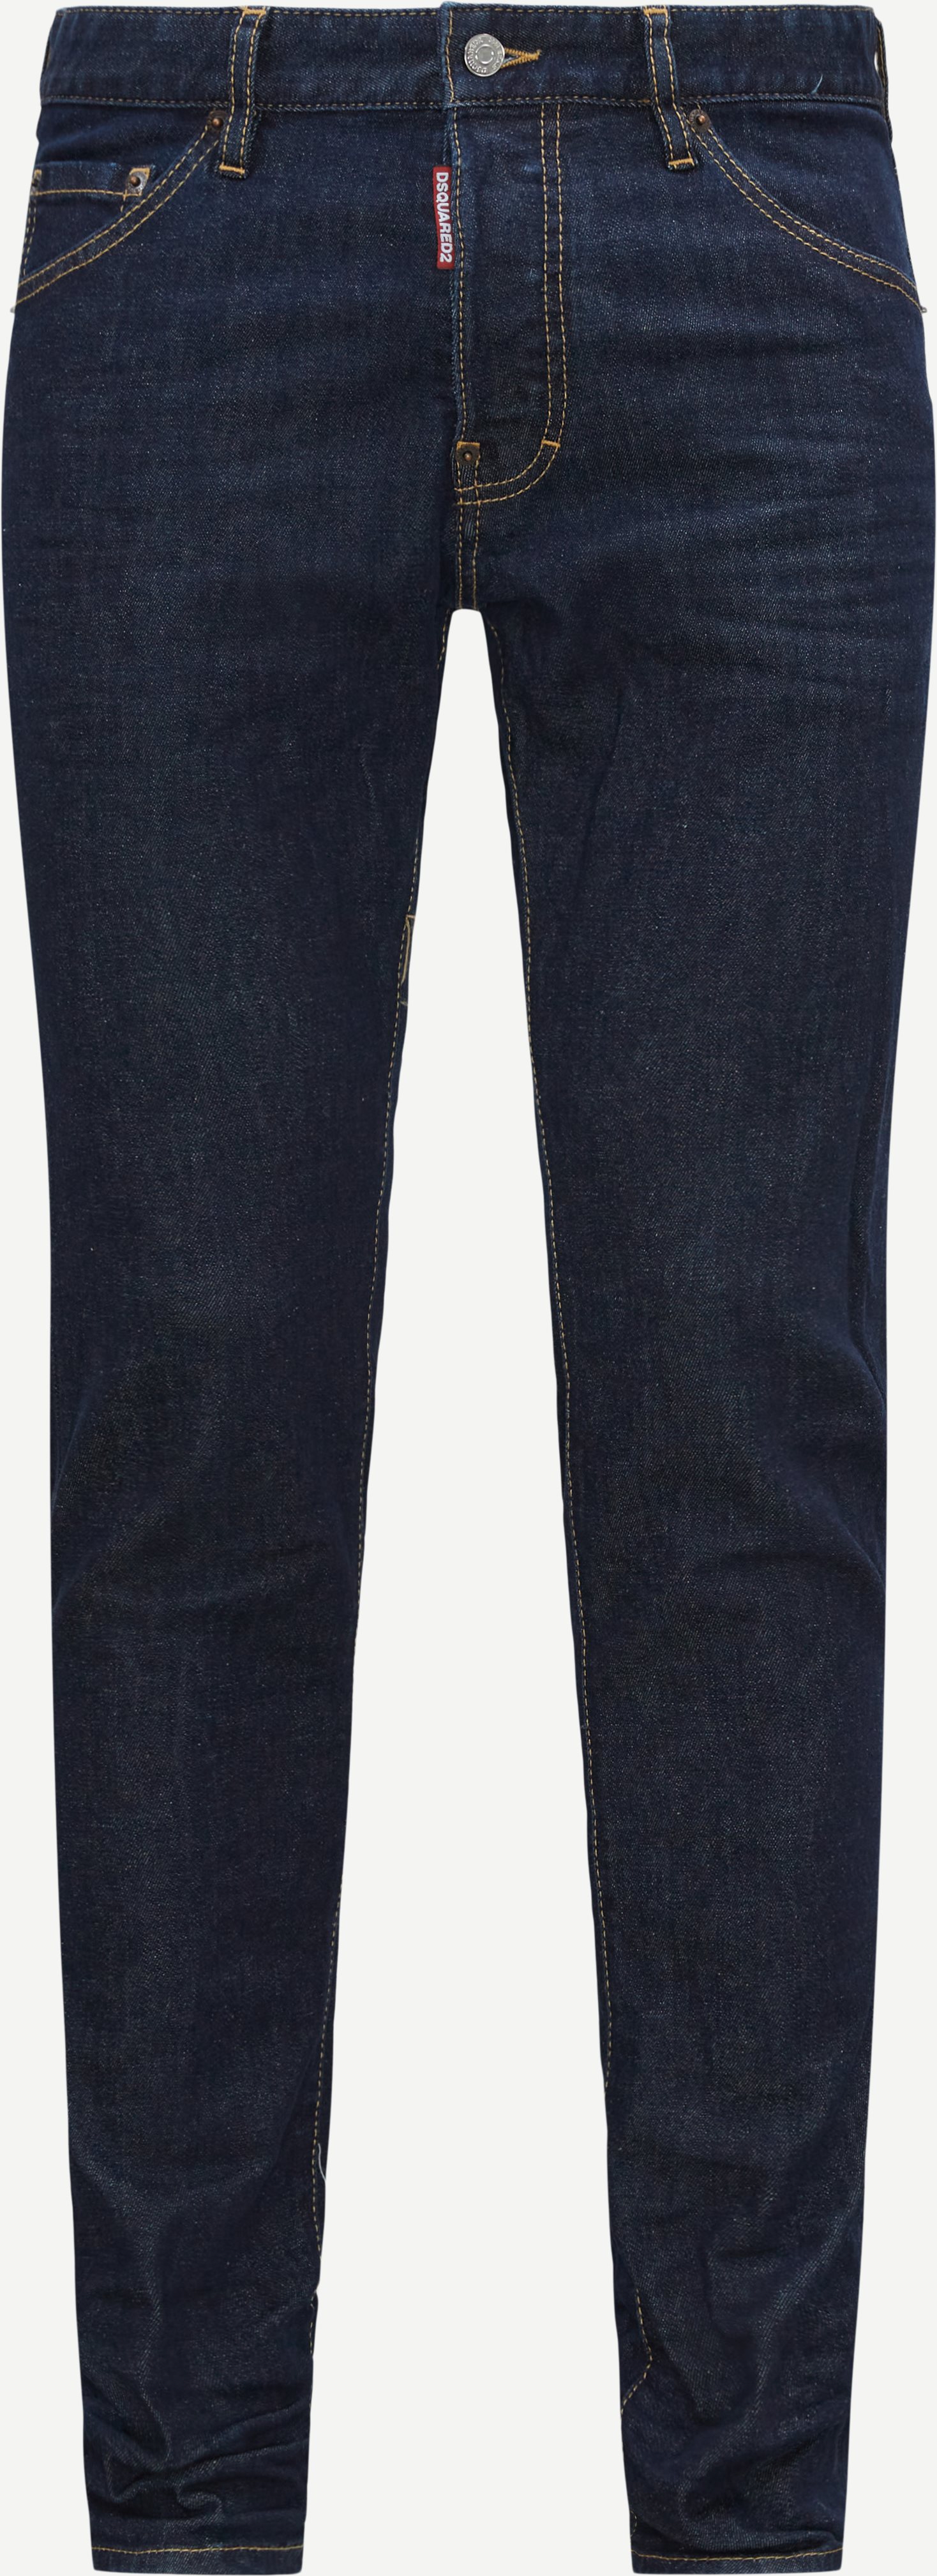 Bee Icon Cool Guy Jeans - Jeans - Slim fit - Denim